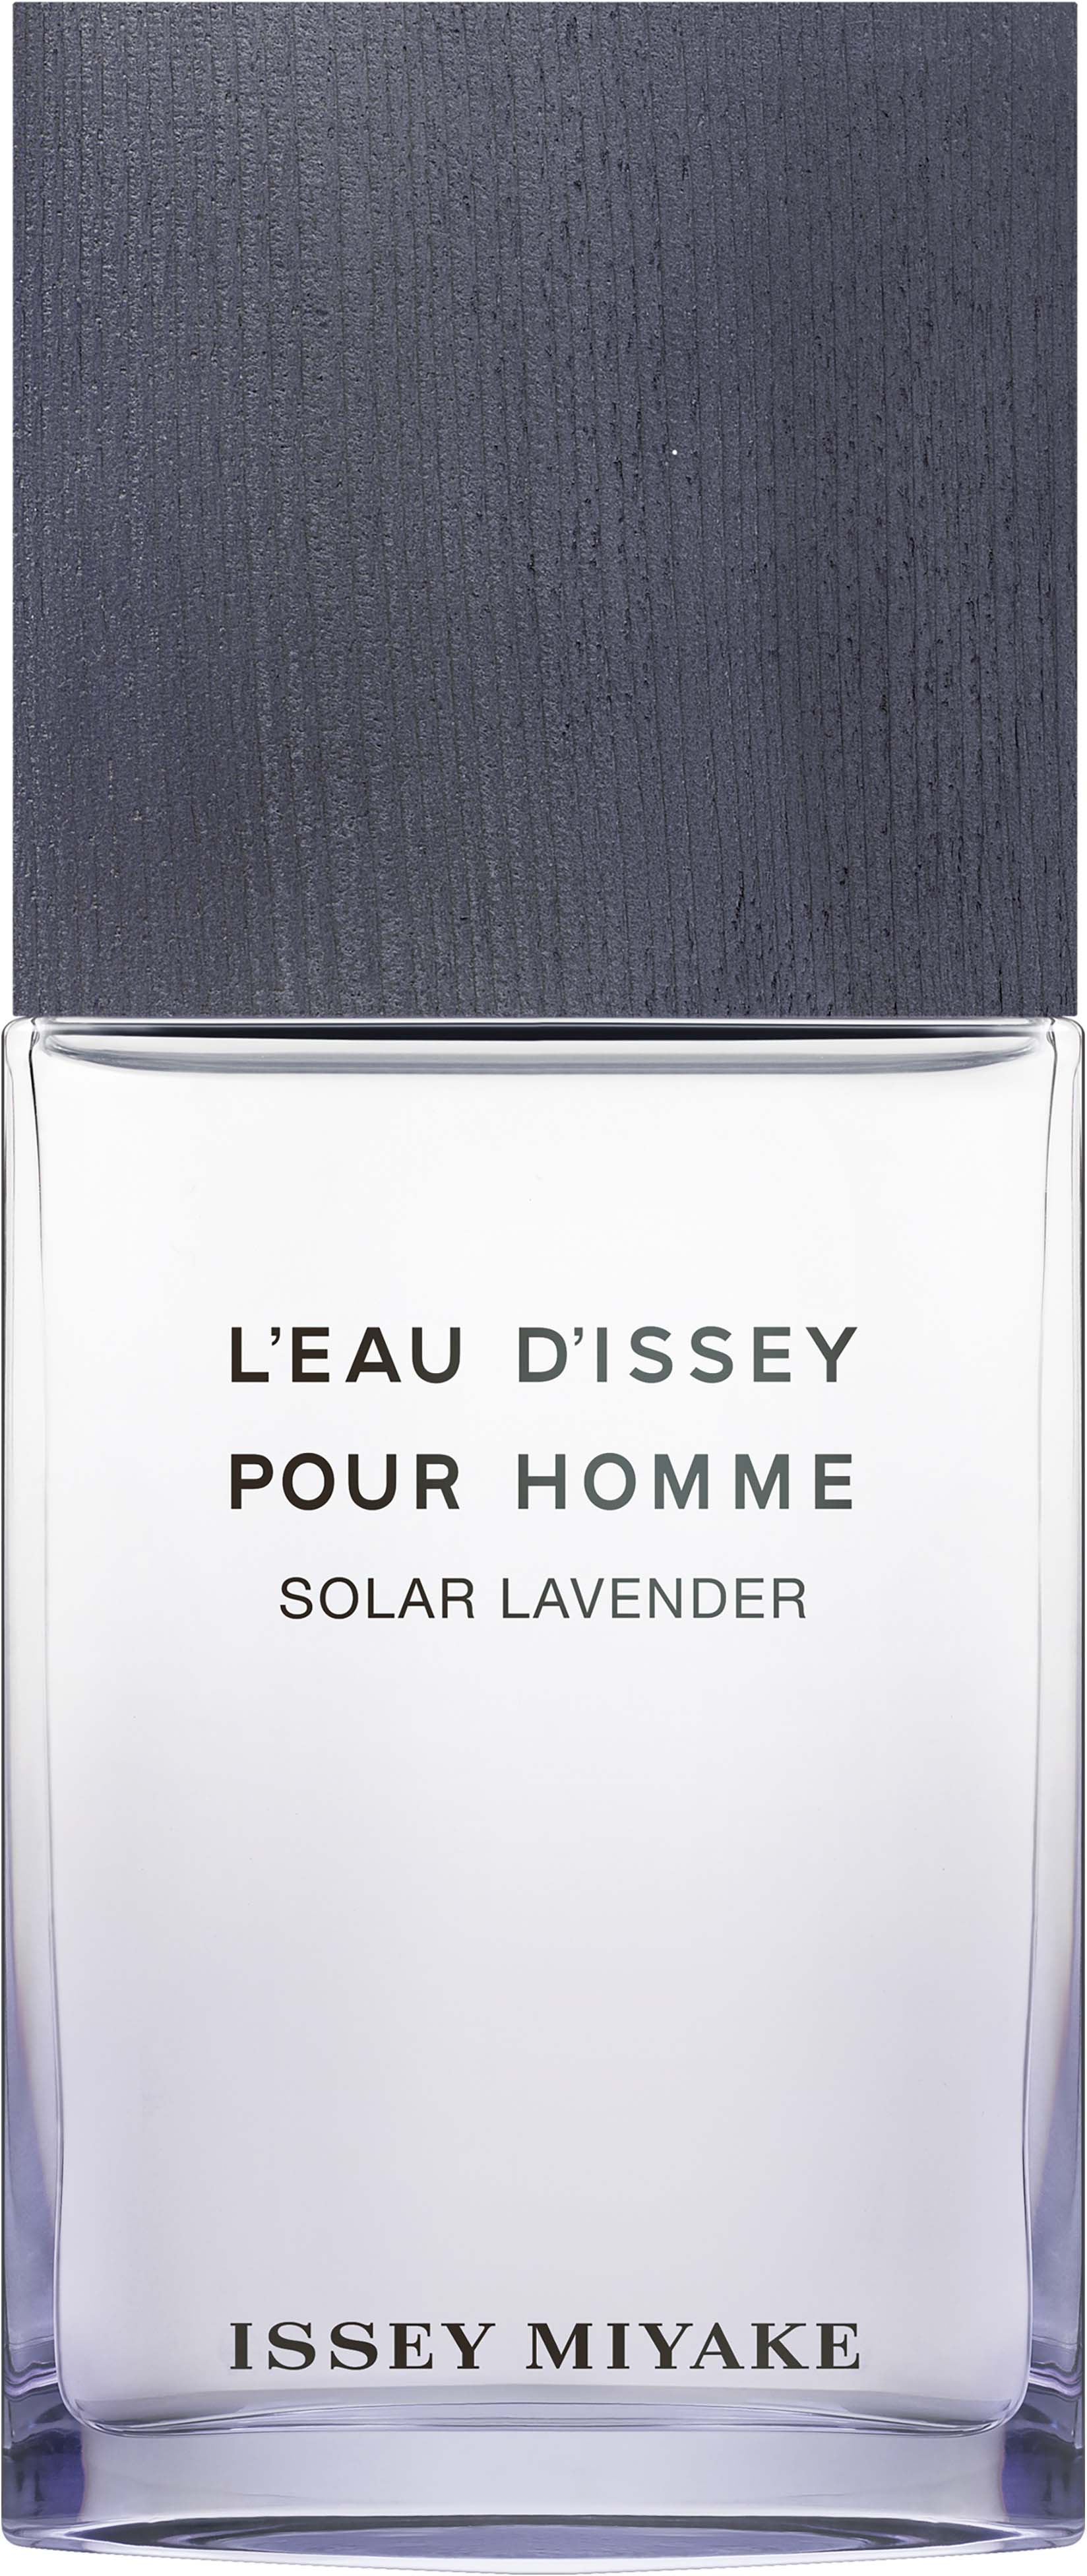 issey miyake l'eau d'issey pour homme intense woda toaletowa 100 ml   